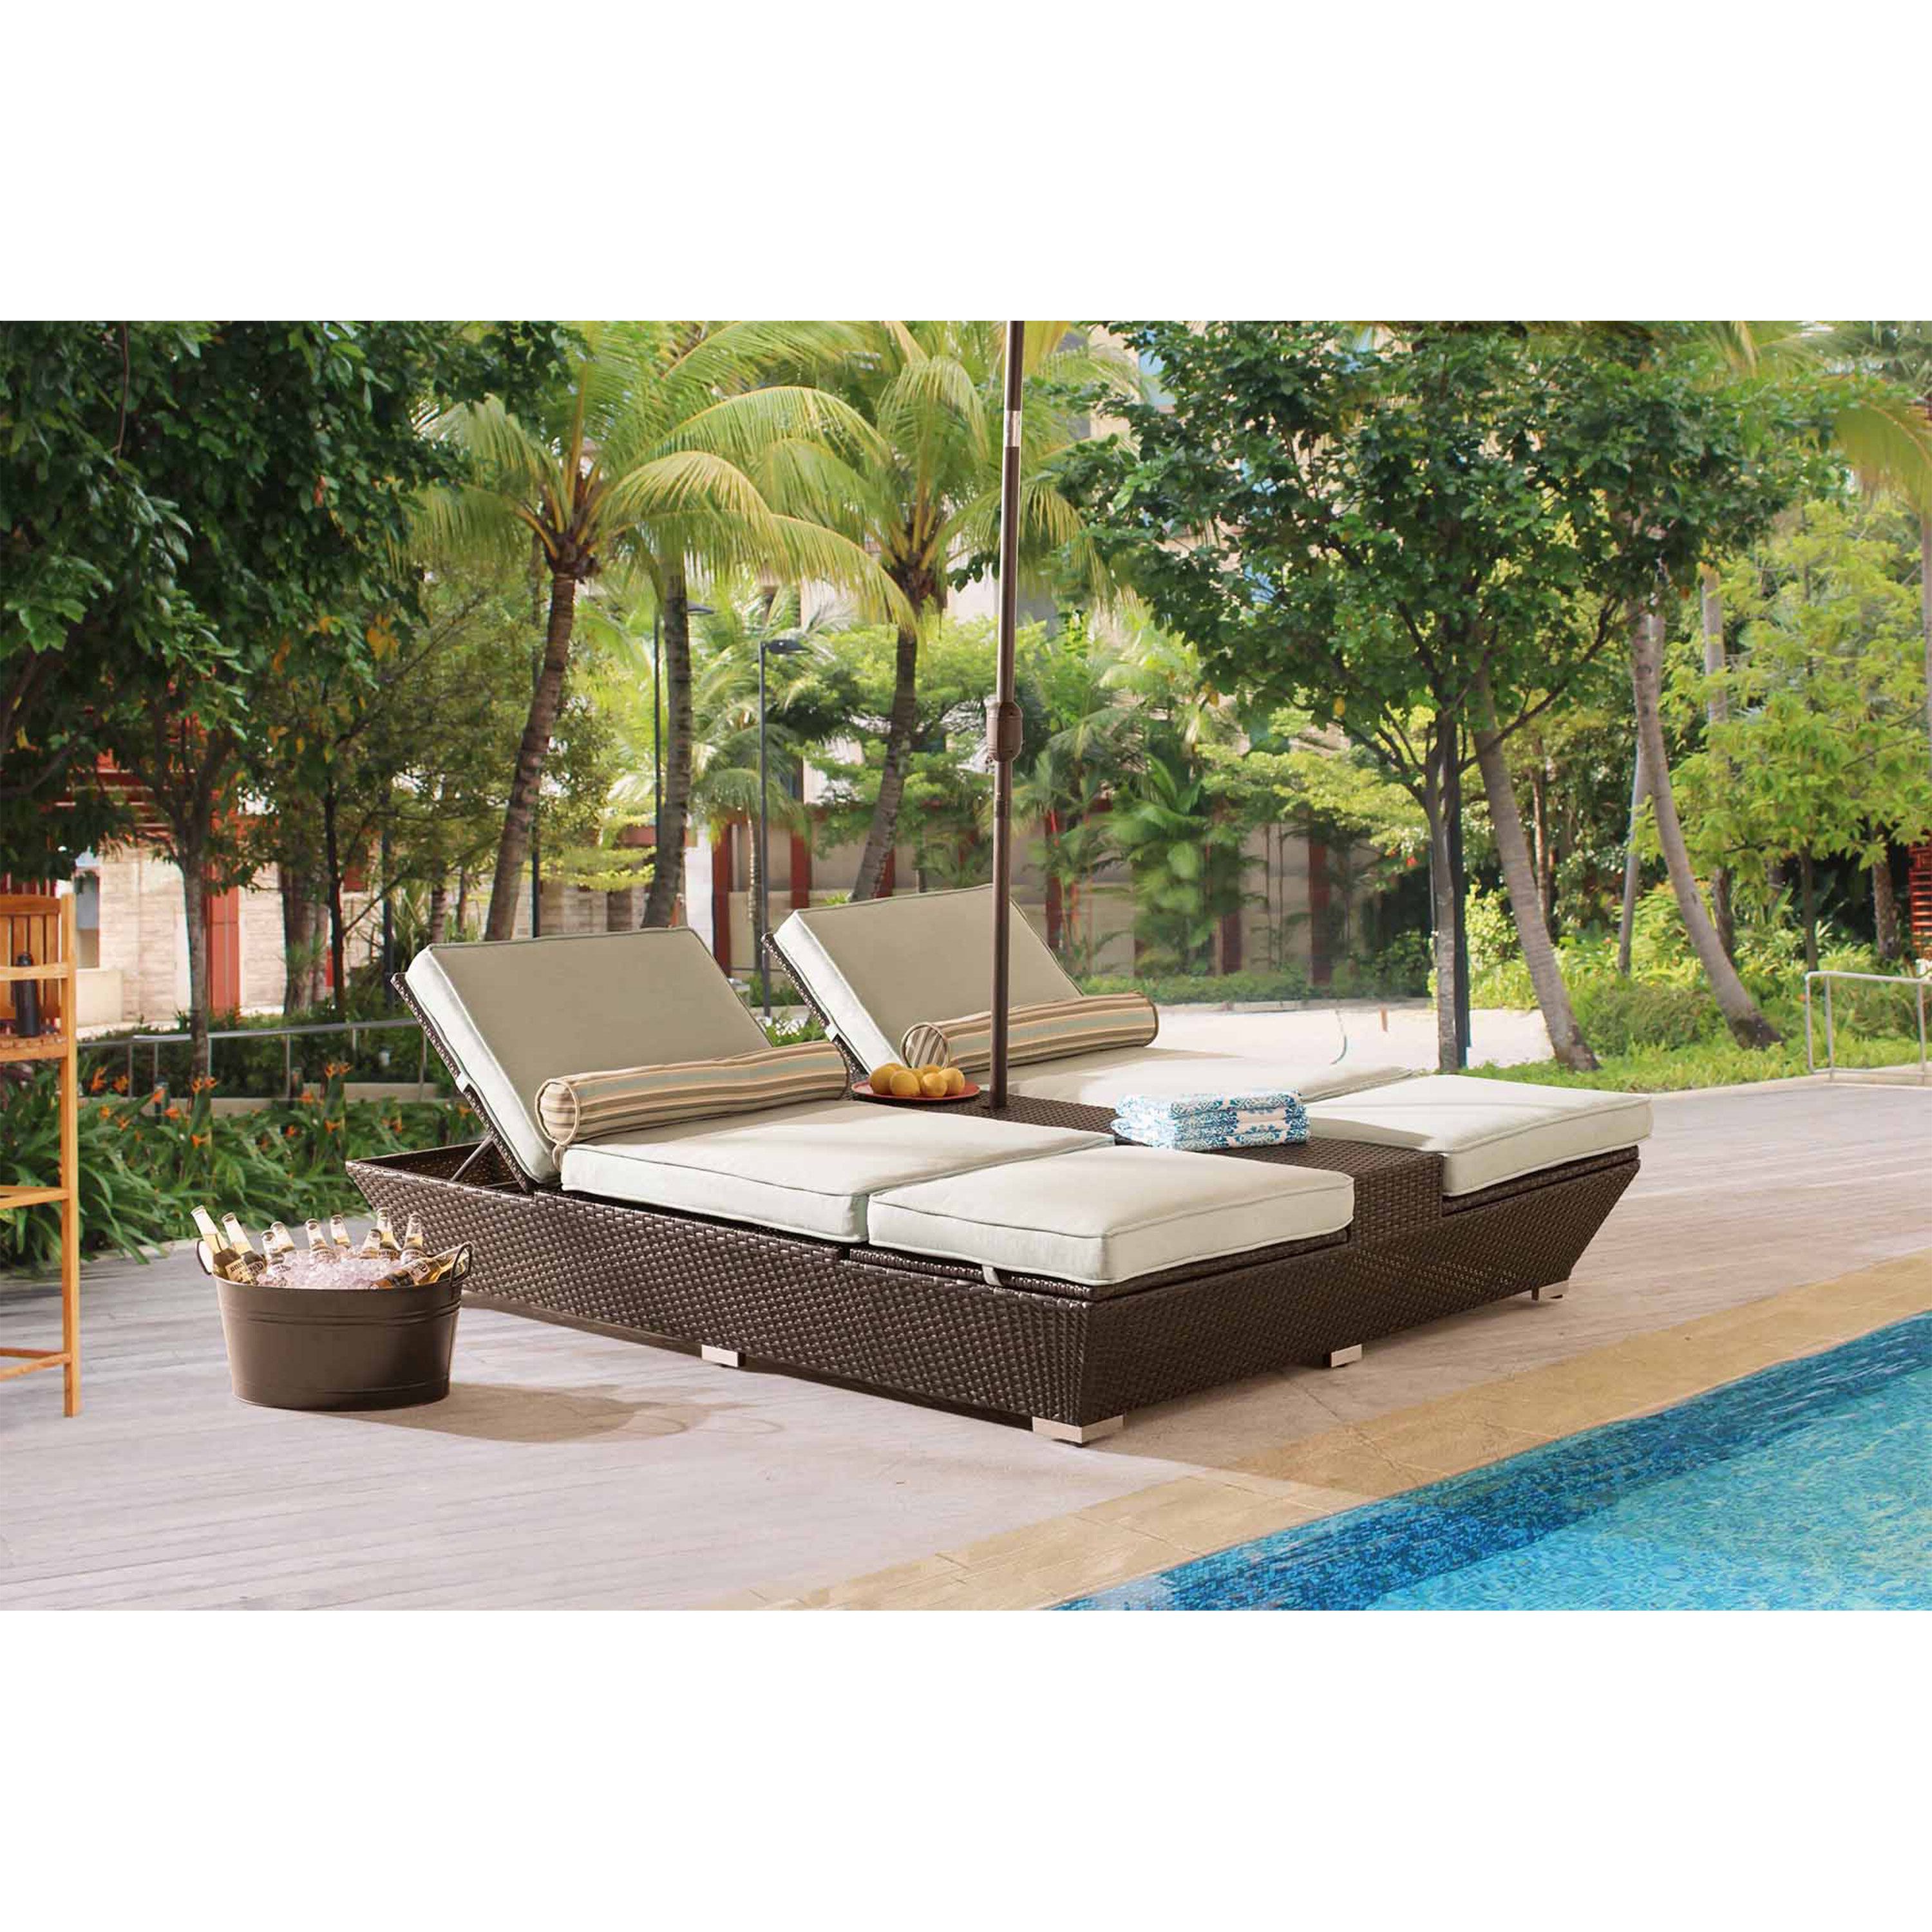 Adelson Double Reclining Chaise Lounge With Cushion Inside Well Liked Resin Wicker Multi Position Double Patio Chaise Lounges (View 18 of 25)